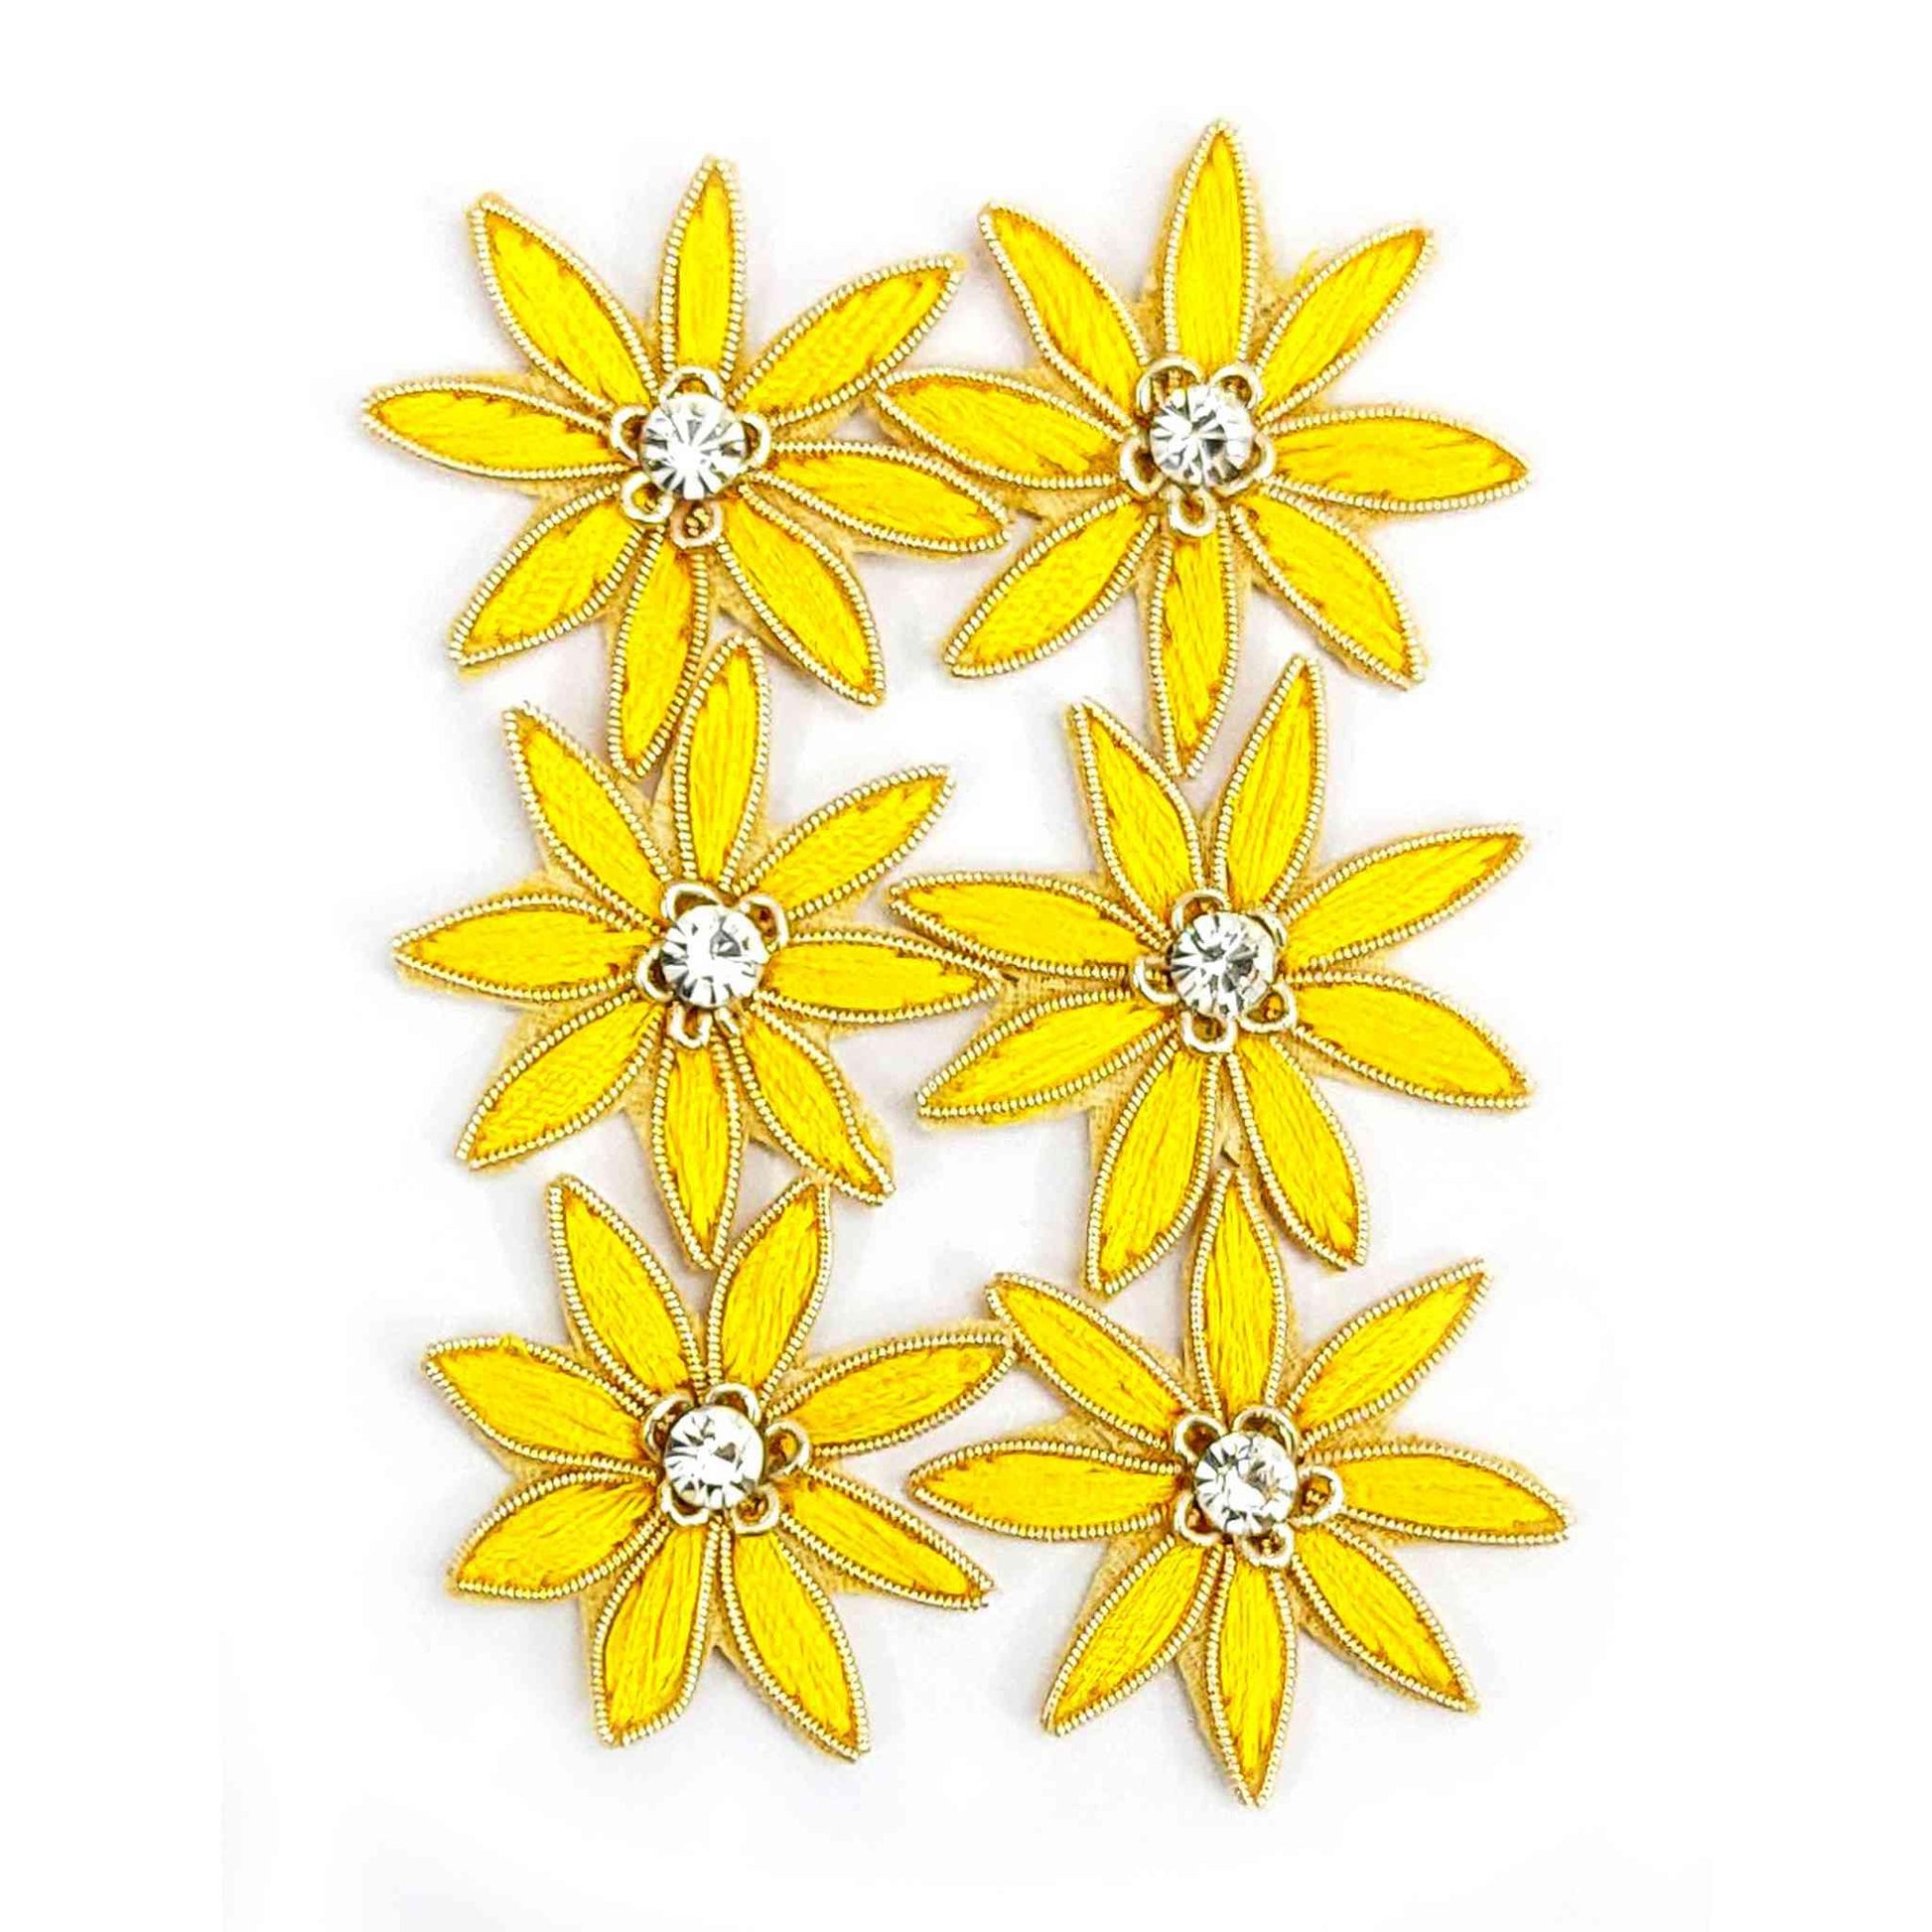 Threaded Strar Style Buti for DIY Craft, Trousseau Packing or Decoration (Bunch of 12) - Design 215, Yellow - Indian Petals